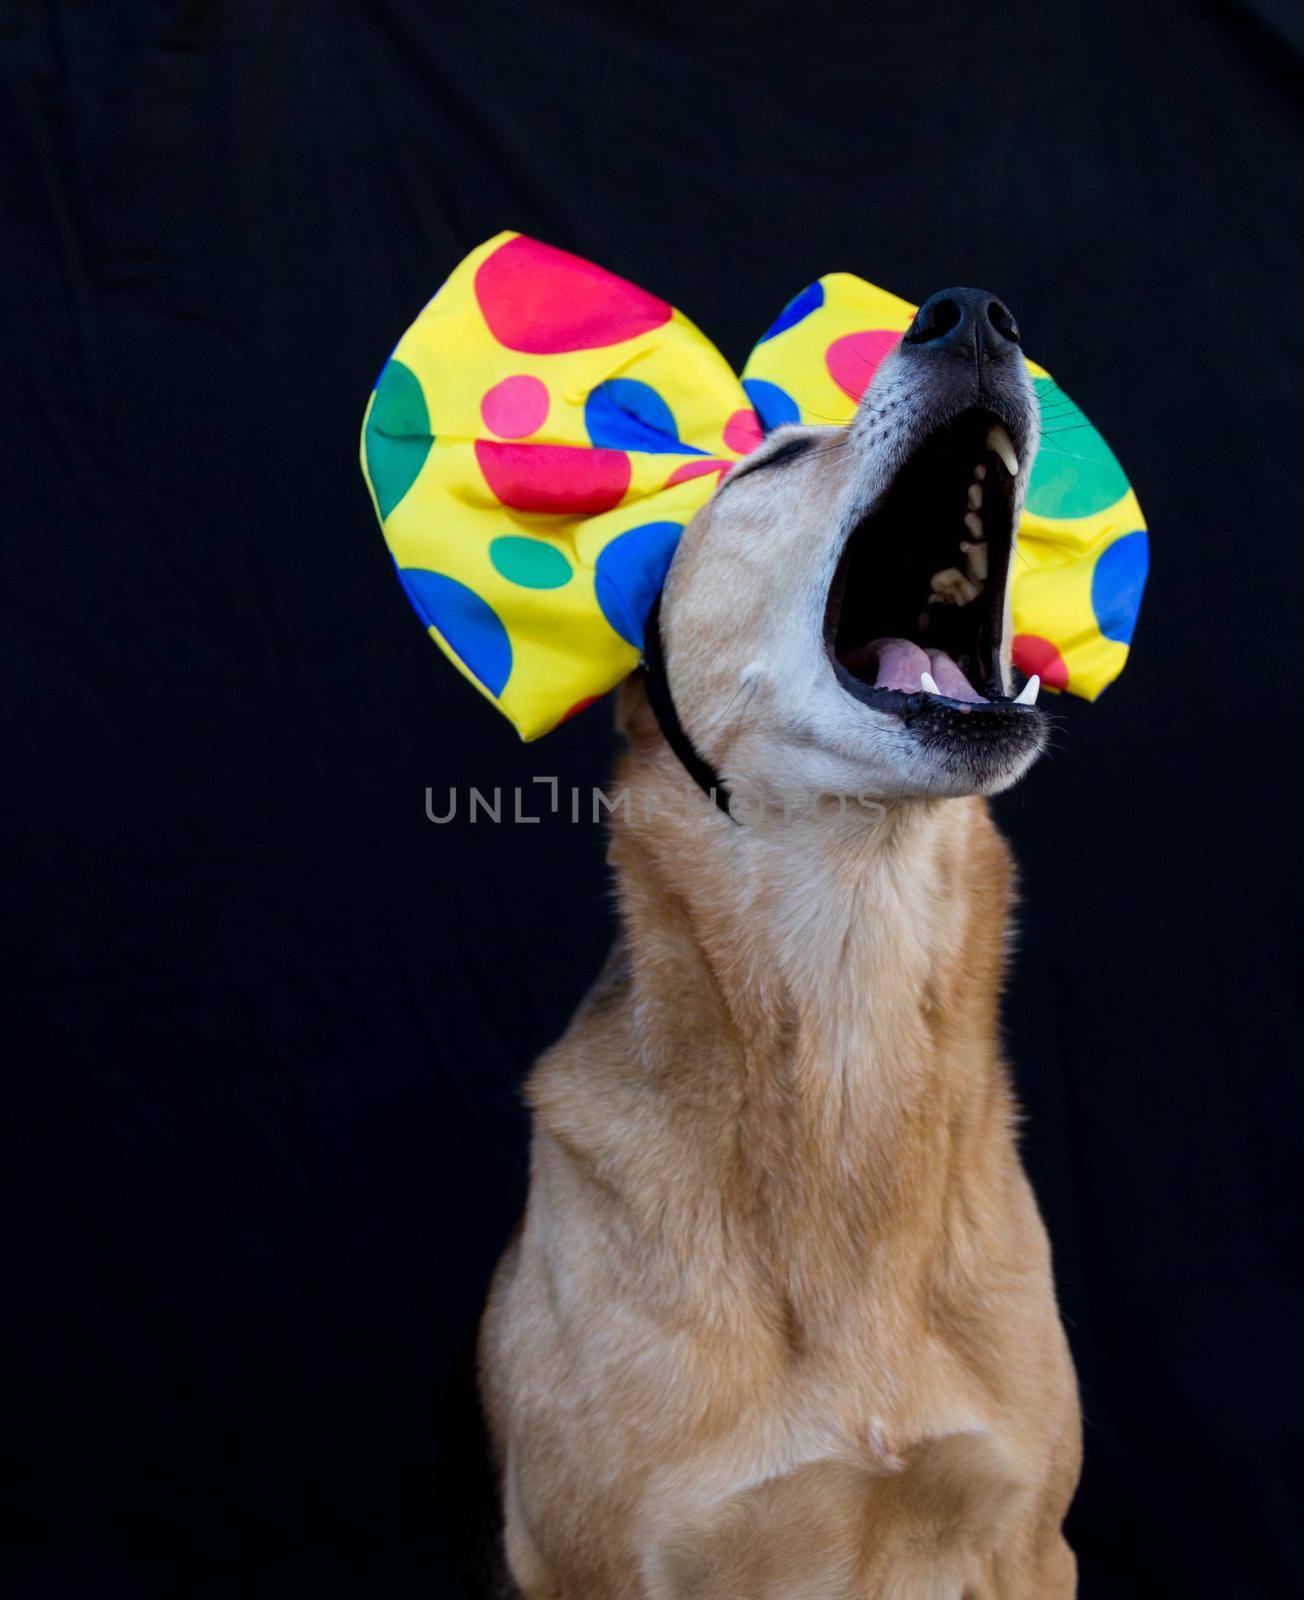 portrait of dog with a big bow tie with colorful polka dots on the head, on black background